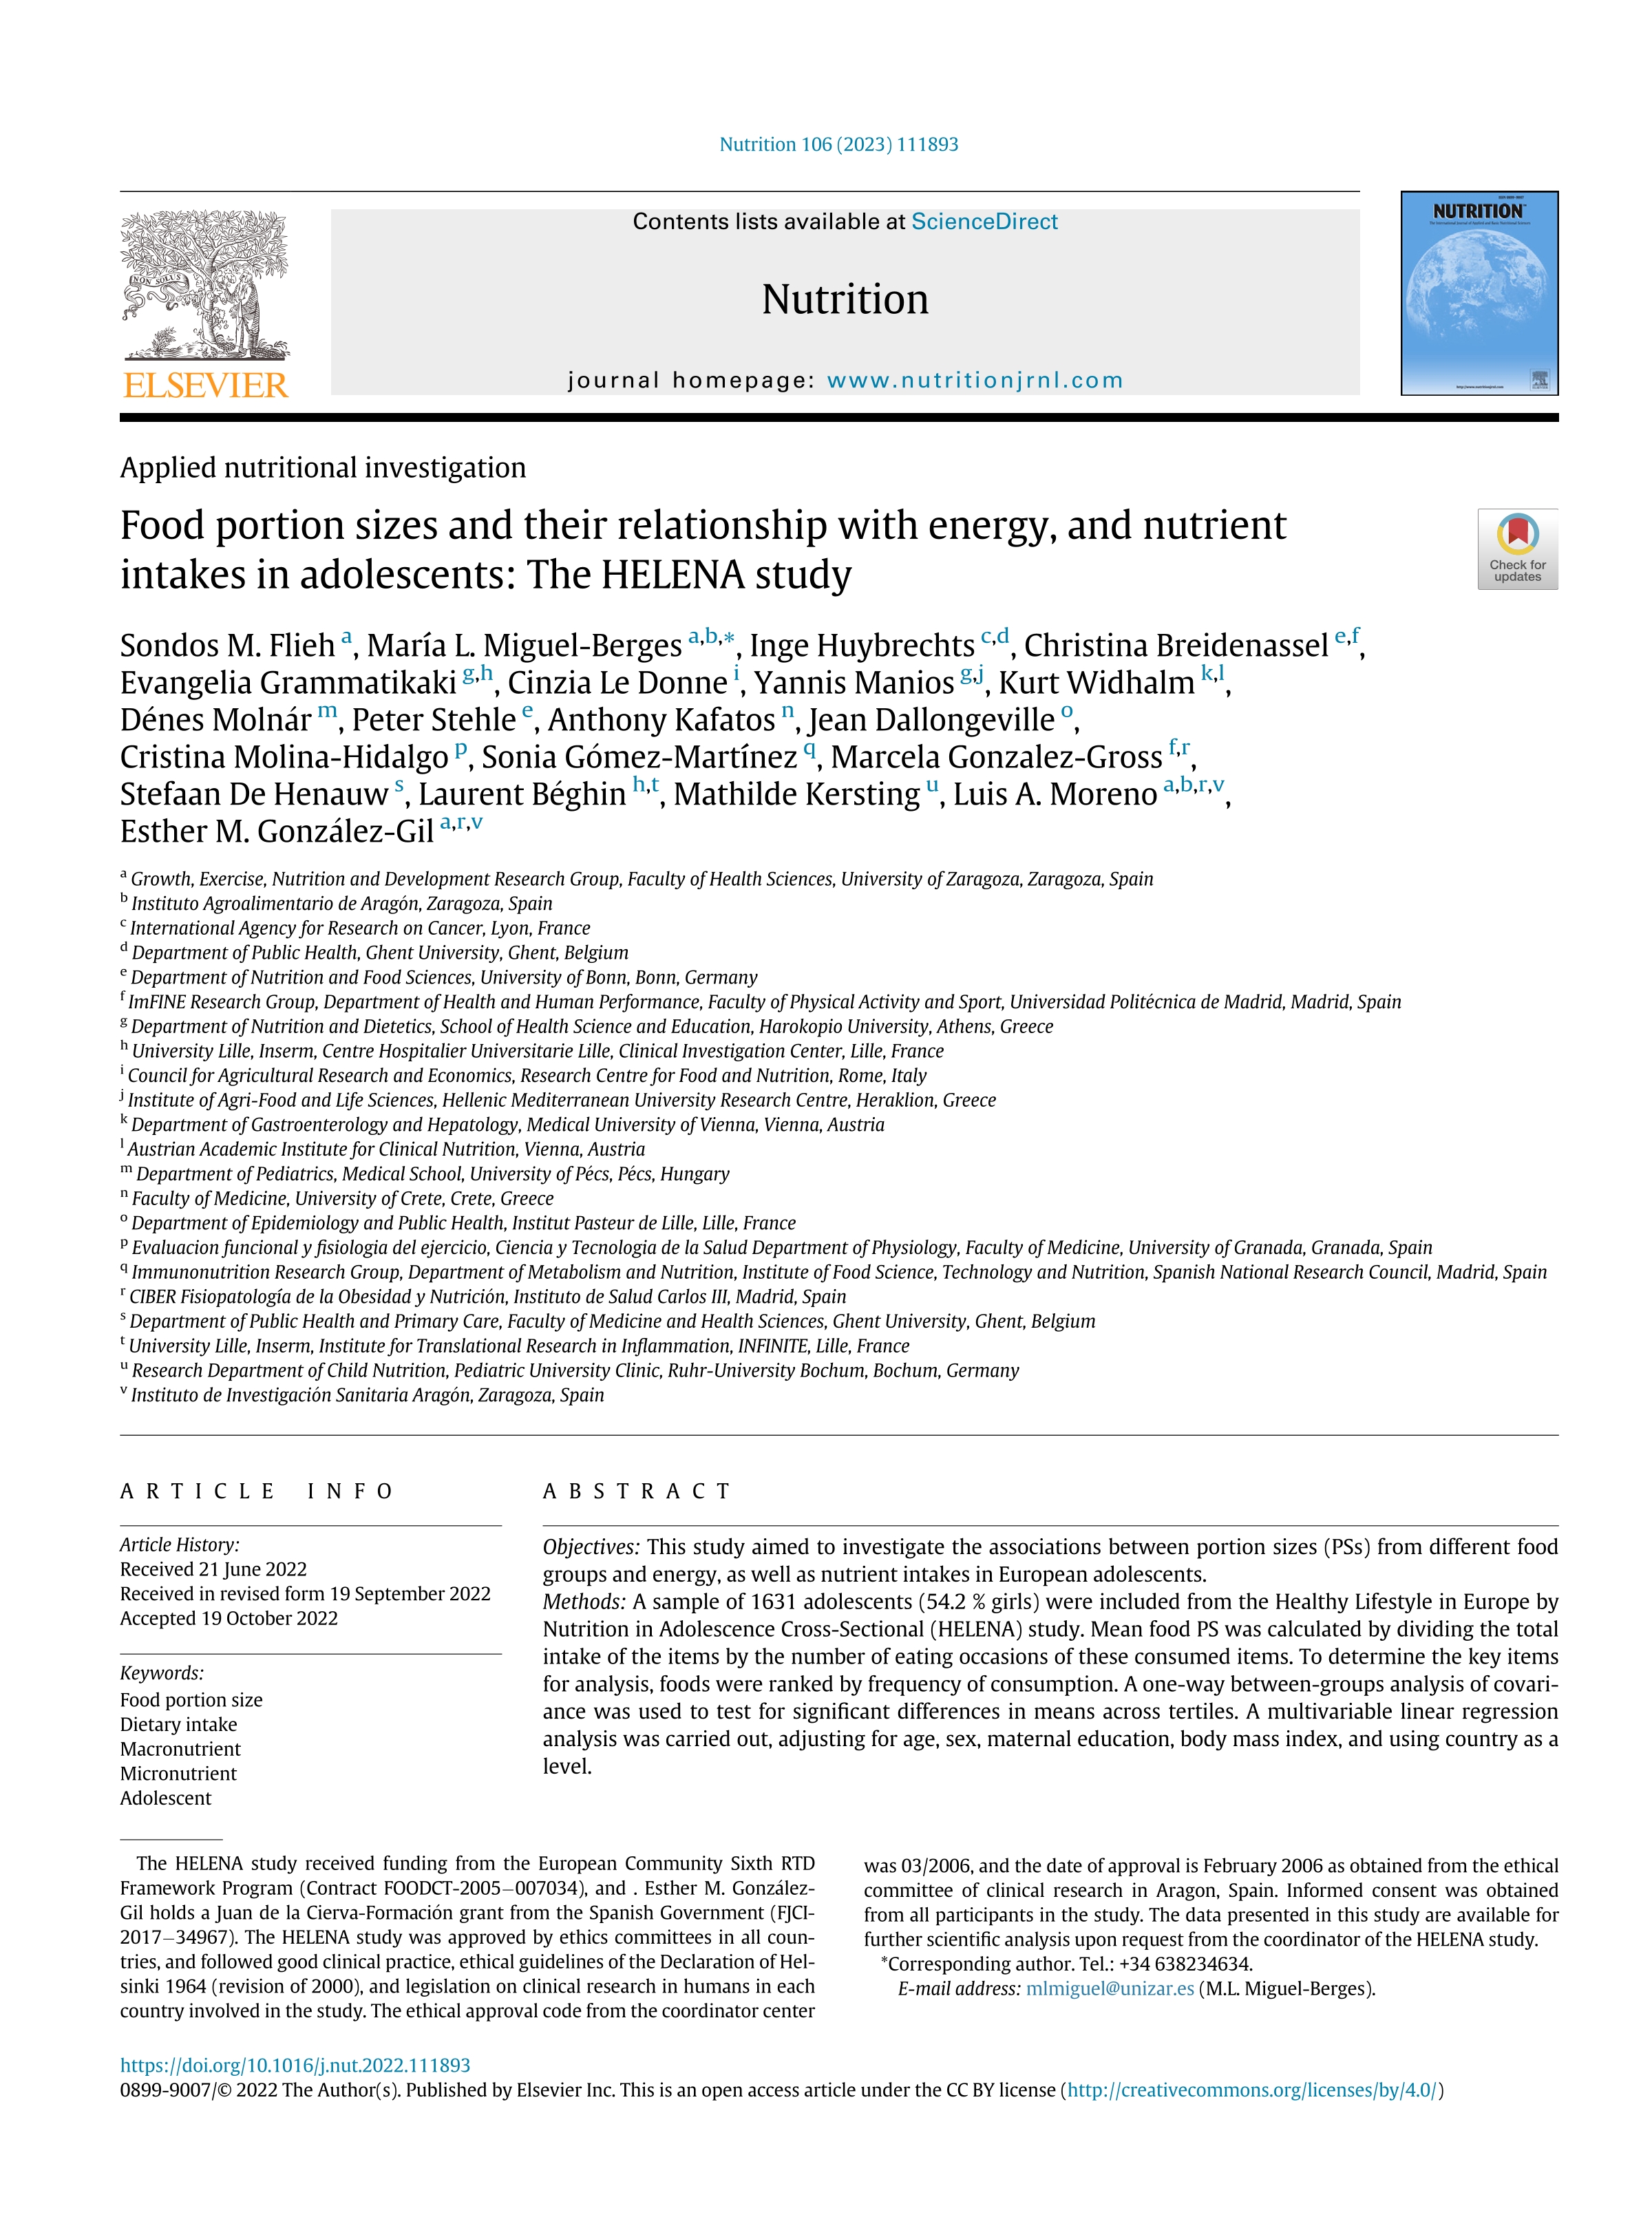 Food portion sizes and their relationship with energy, and nutrient intakes in adolescents: The HELENA study